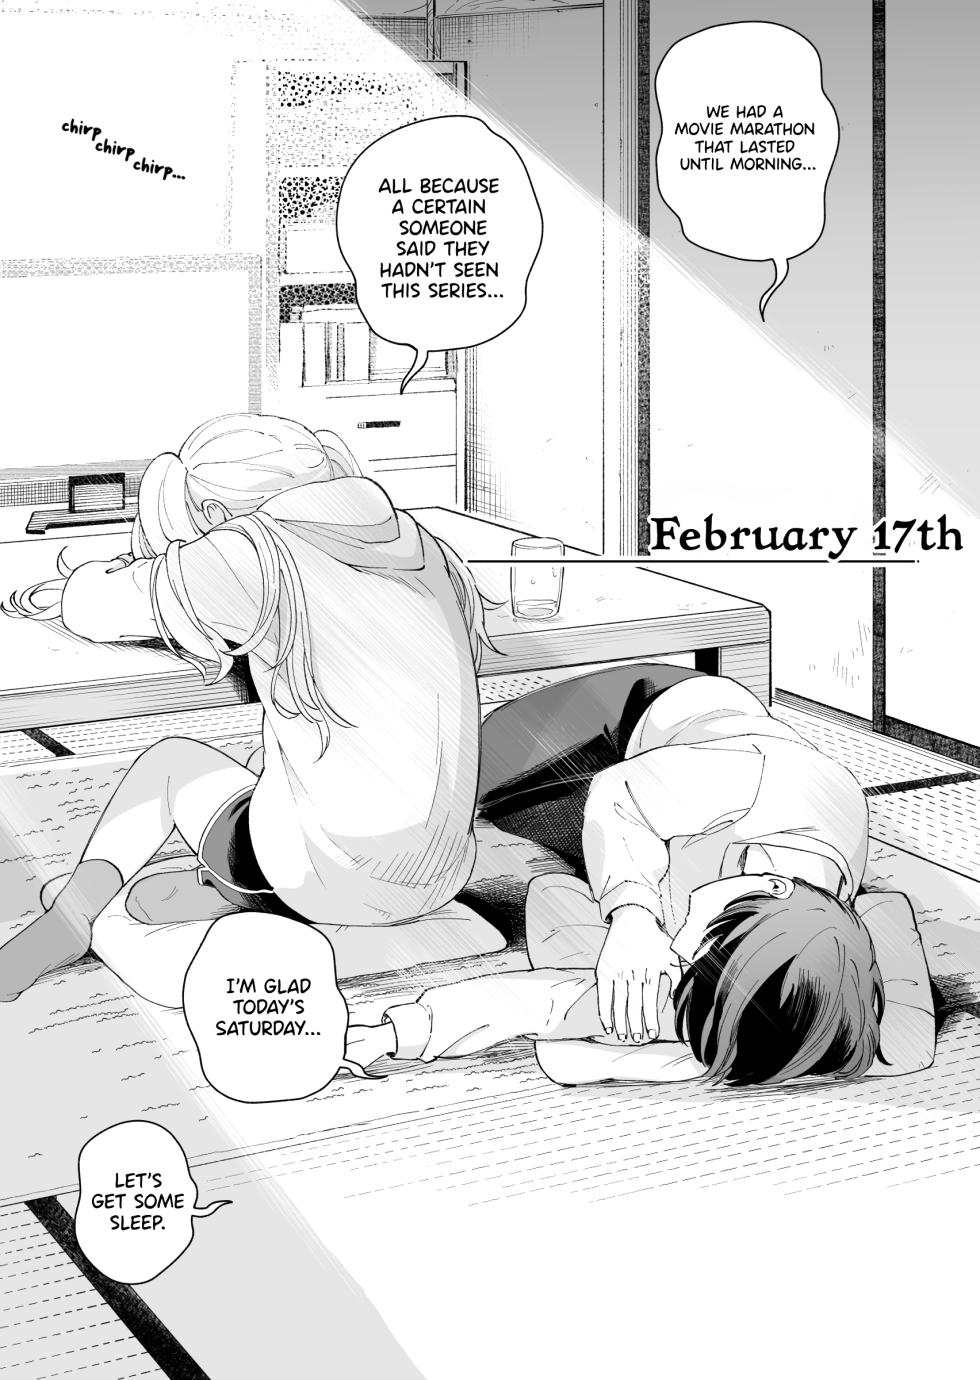 [Hiro no Ke (Hiro Hirono)] Sasete Kureru 3 no Gimai | A Younger Stepsister Who Only Has Sex With Me on Days That are Divisible by 3 or on Days That Include The Number 3. [English] [HeatManga] - Page 19